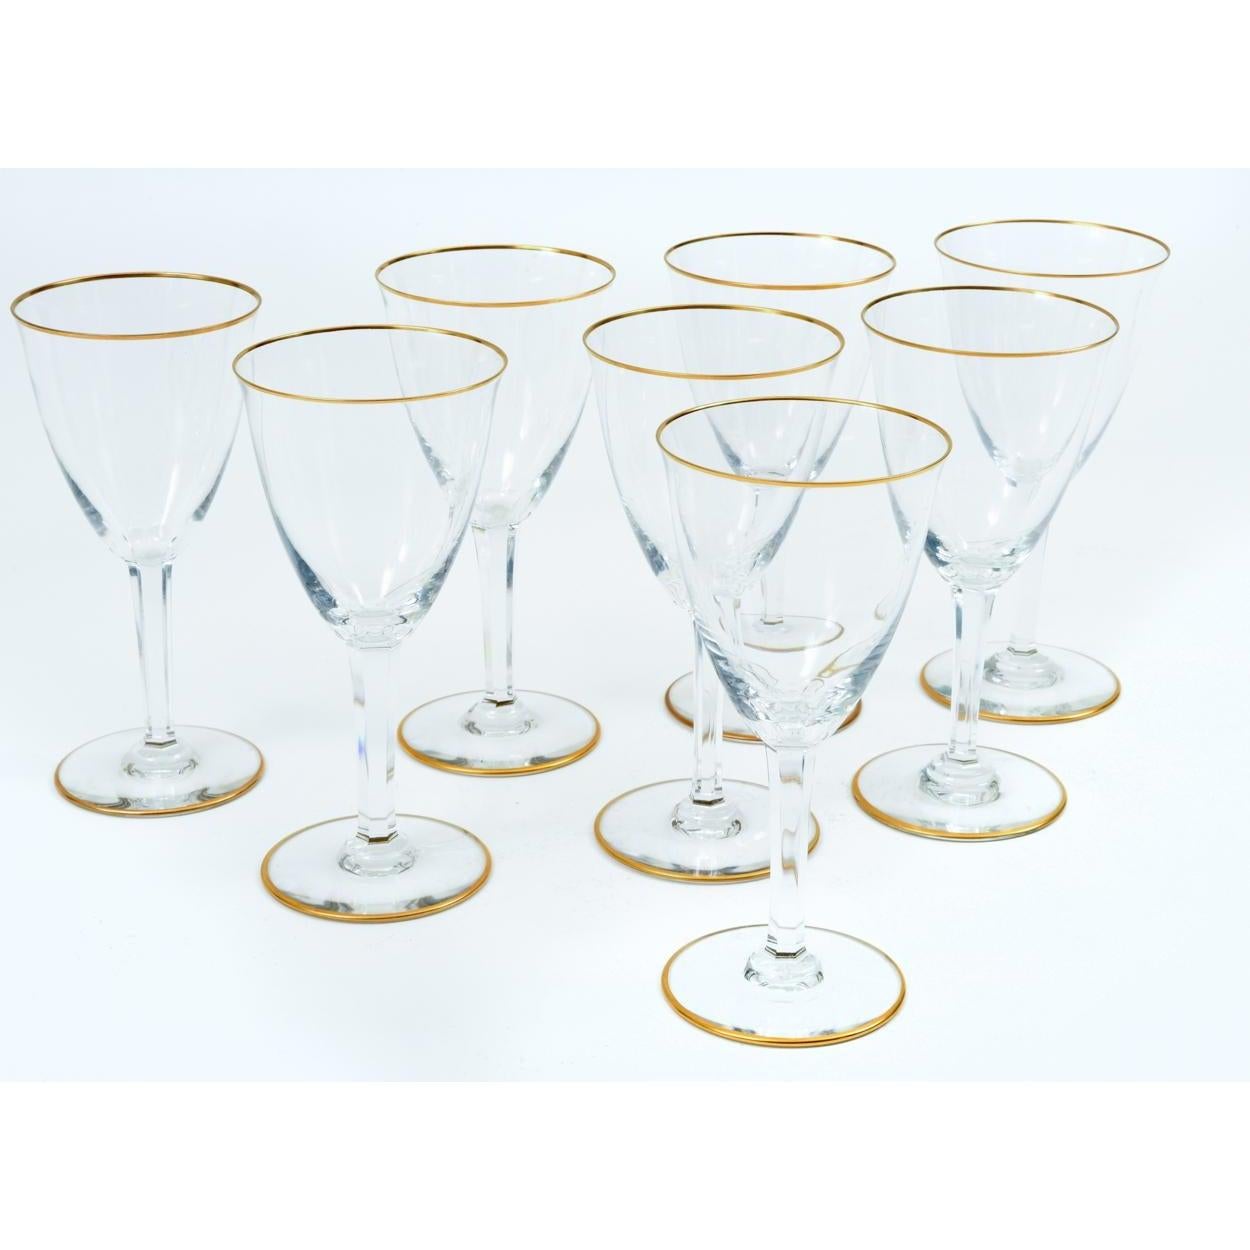 Gold Baccarat Crystal Barware / Tableware Wine Service / 8 People For Sale